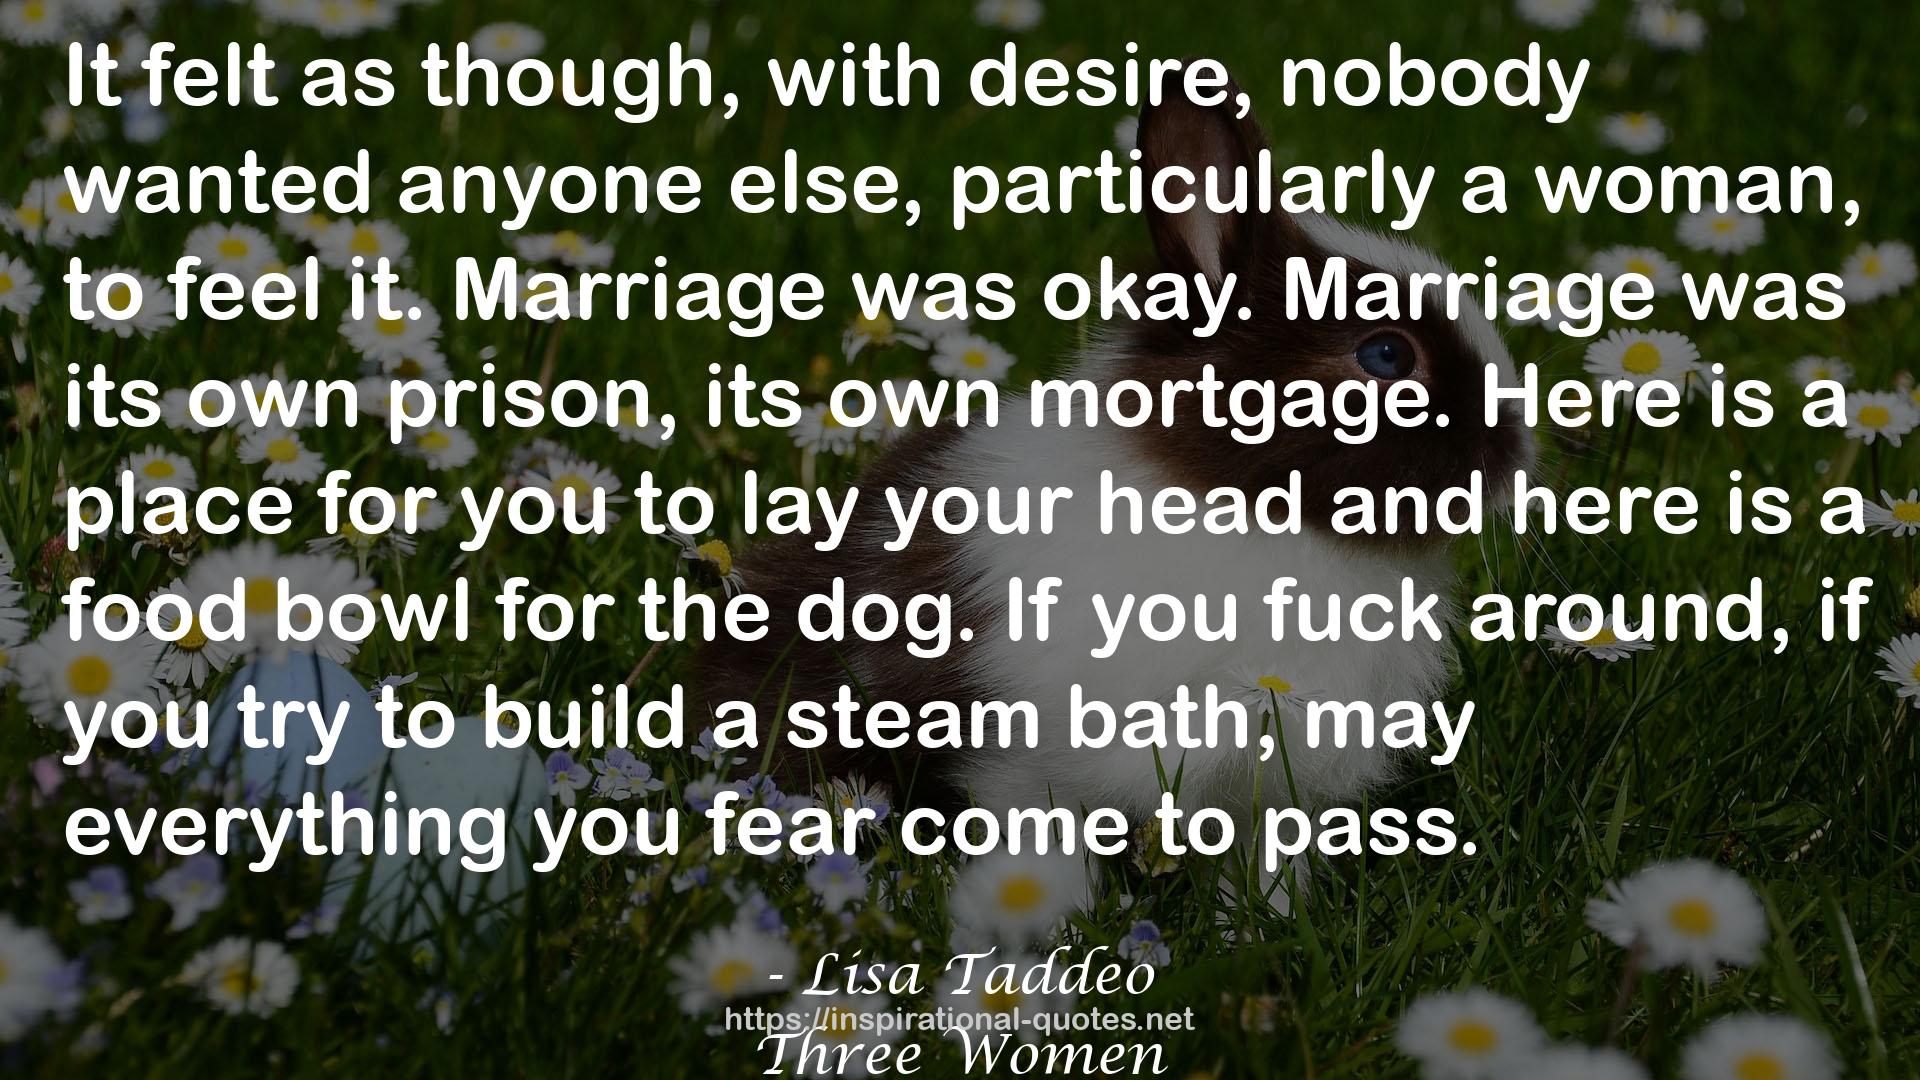 Lisa Taddeo QUOTES